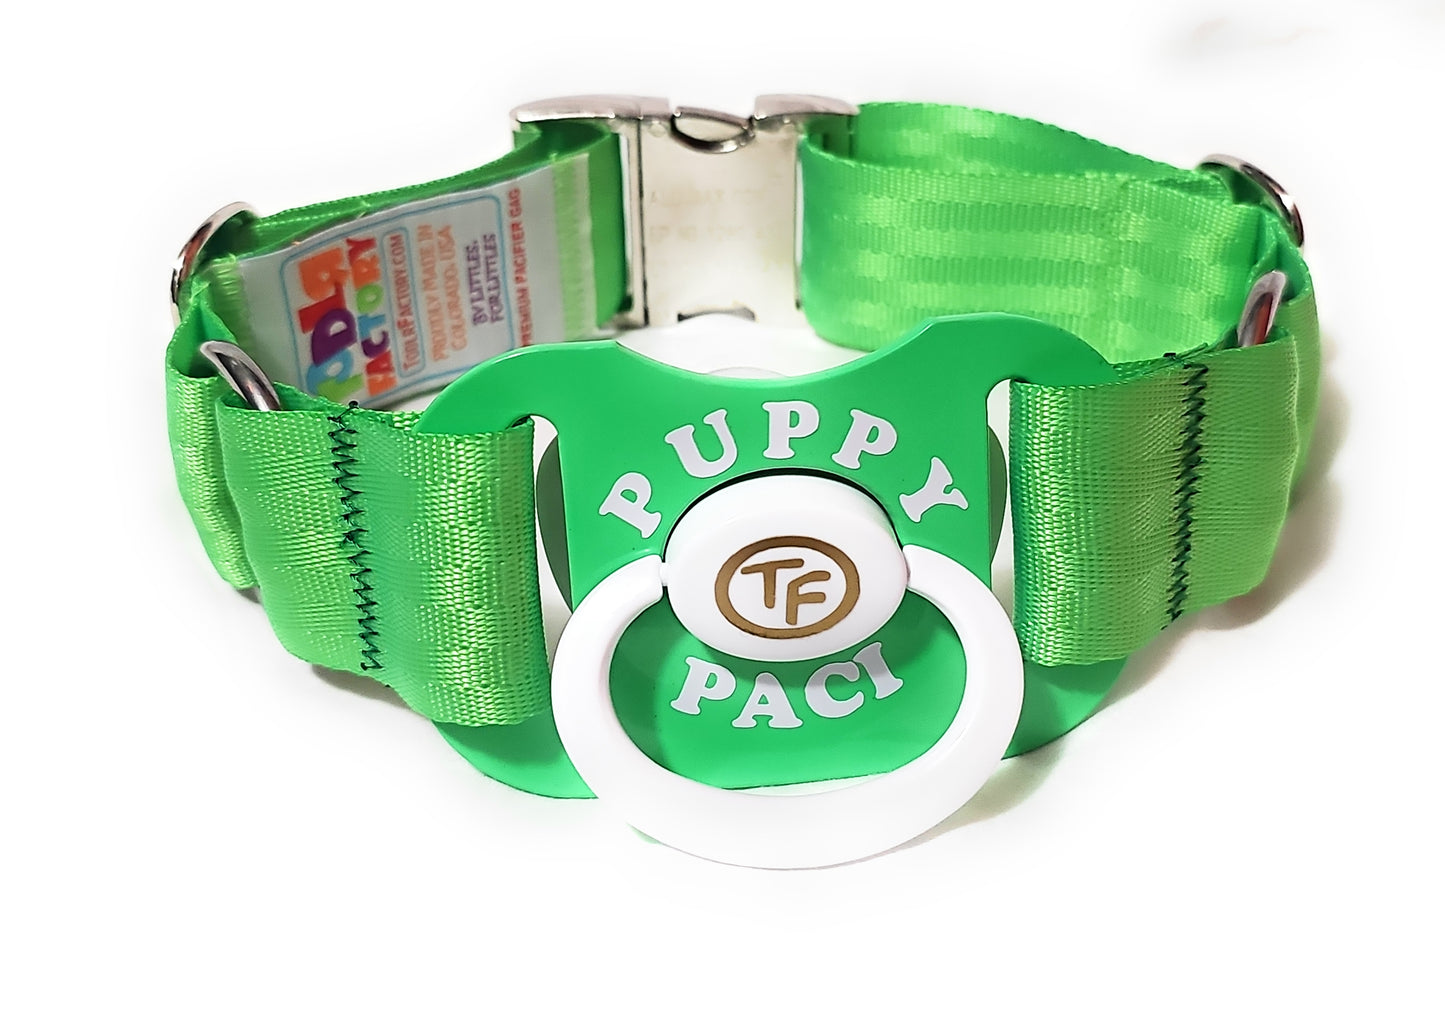 Todlr Factory Premium Adult Standard Sz 6 Pacifier PaciGag Ageplay ABDL Little - "PUPPY PACI"